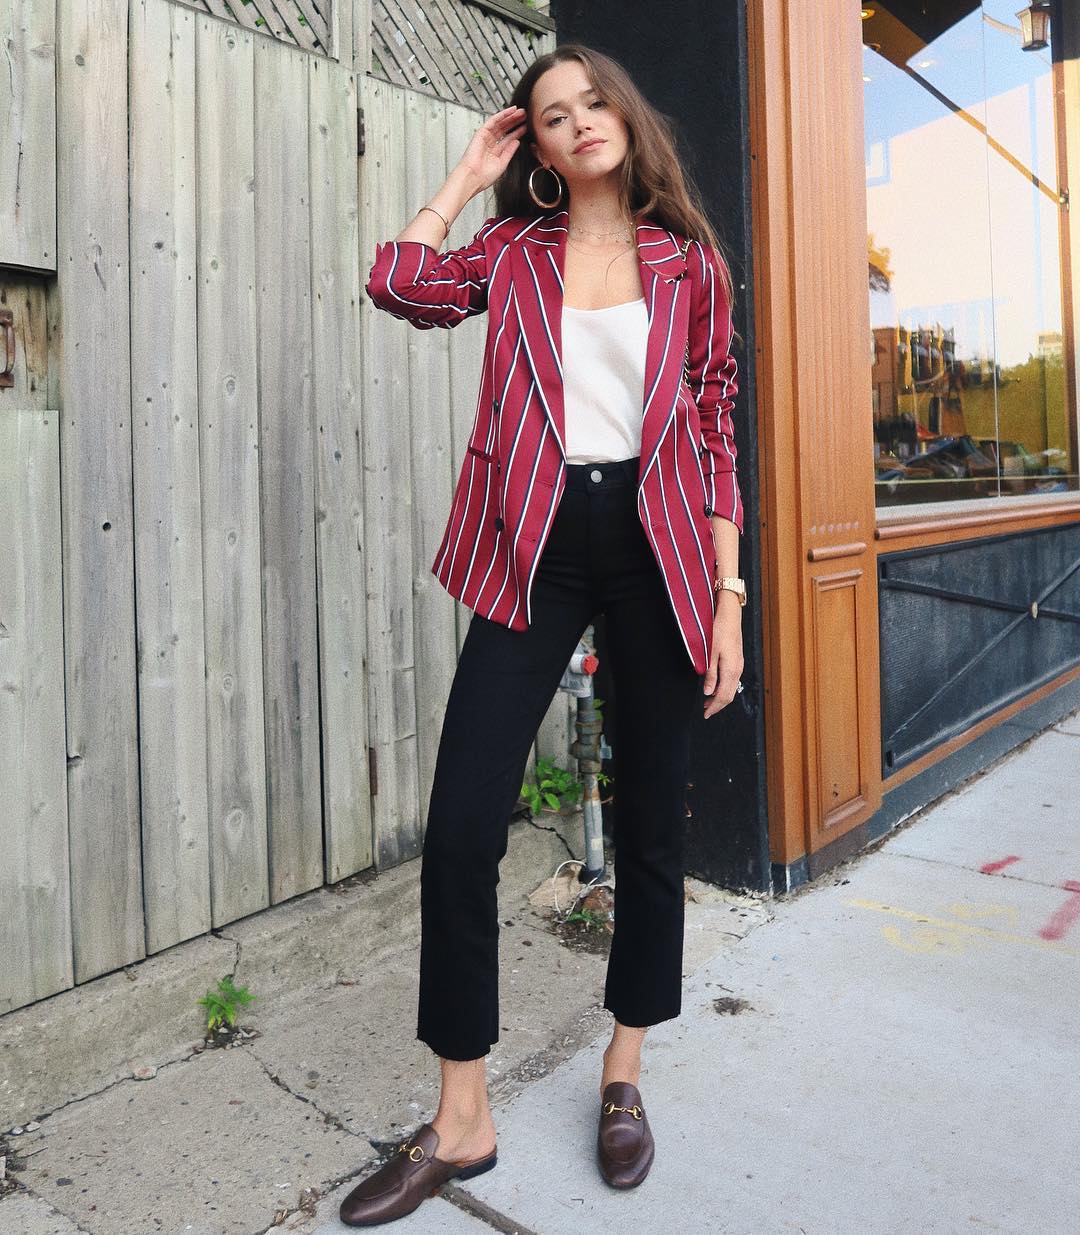 Black Boot Cut Jeans, Flats, White Top And Red Striped Blazer